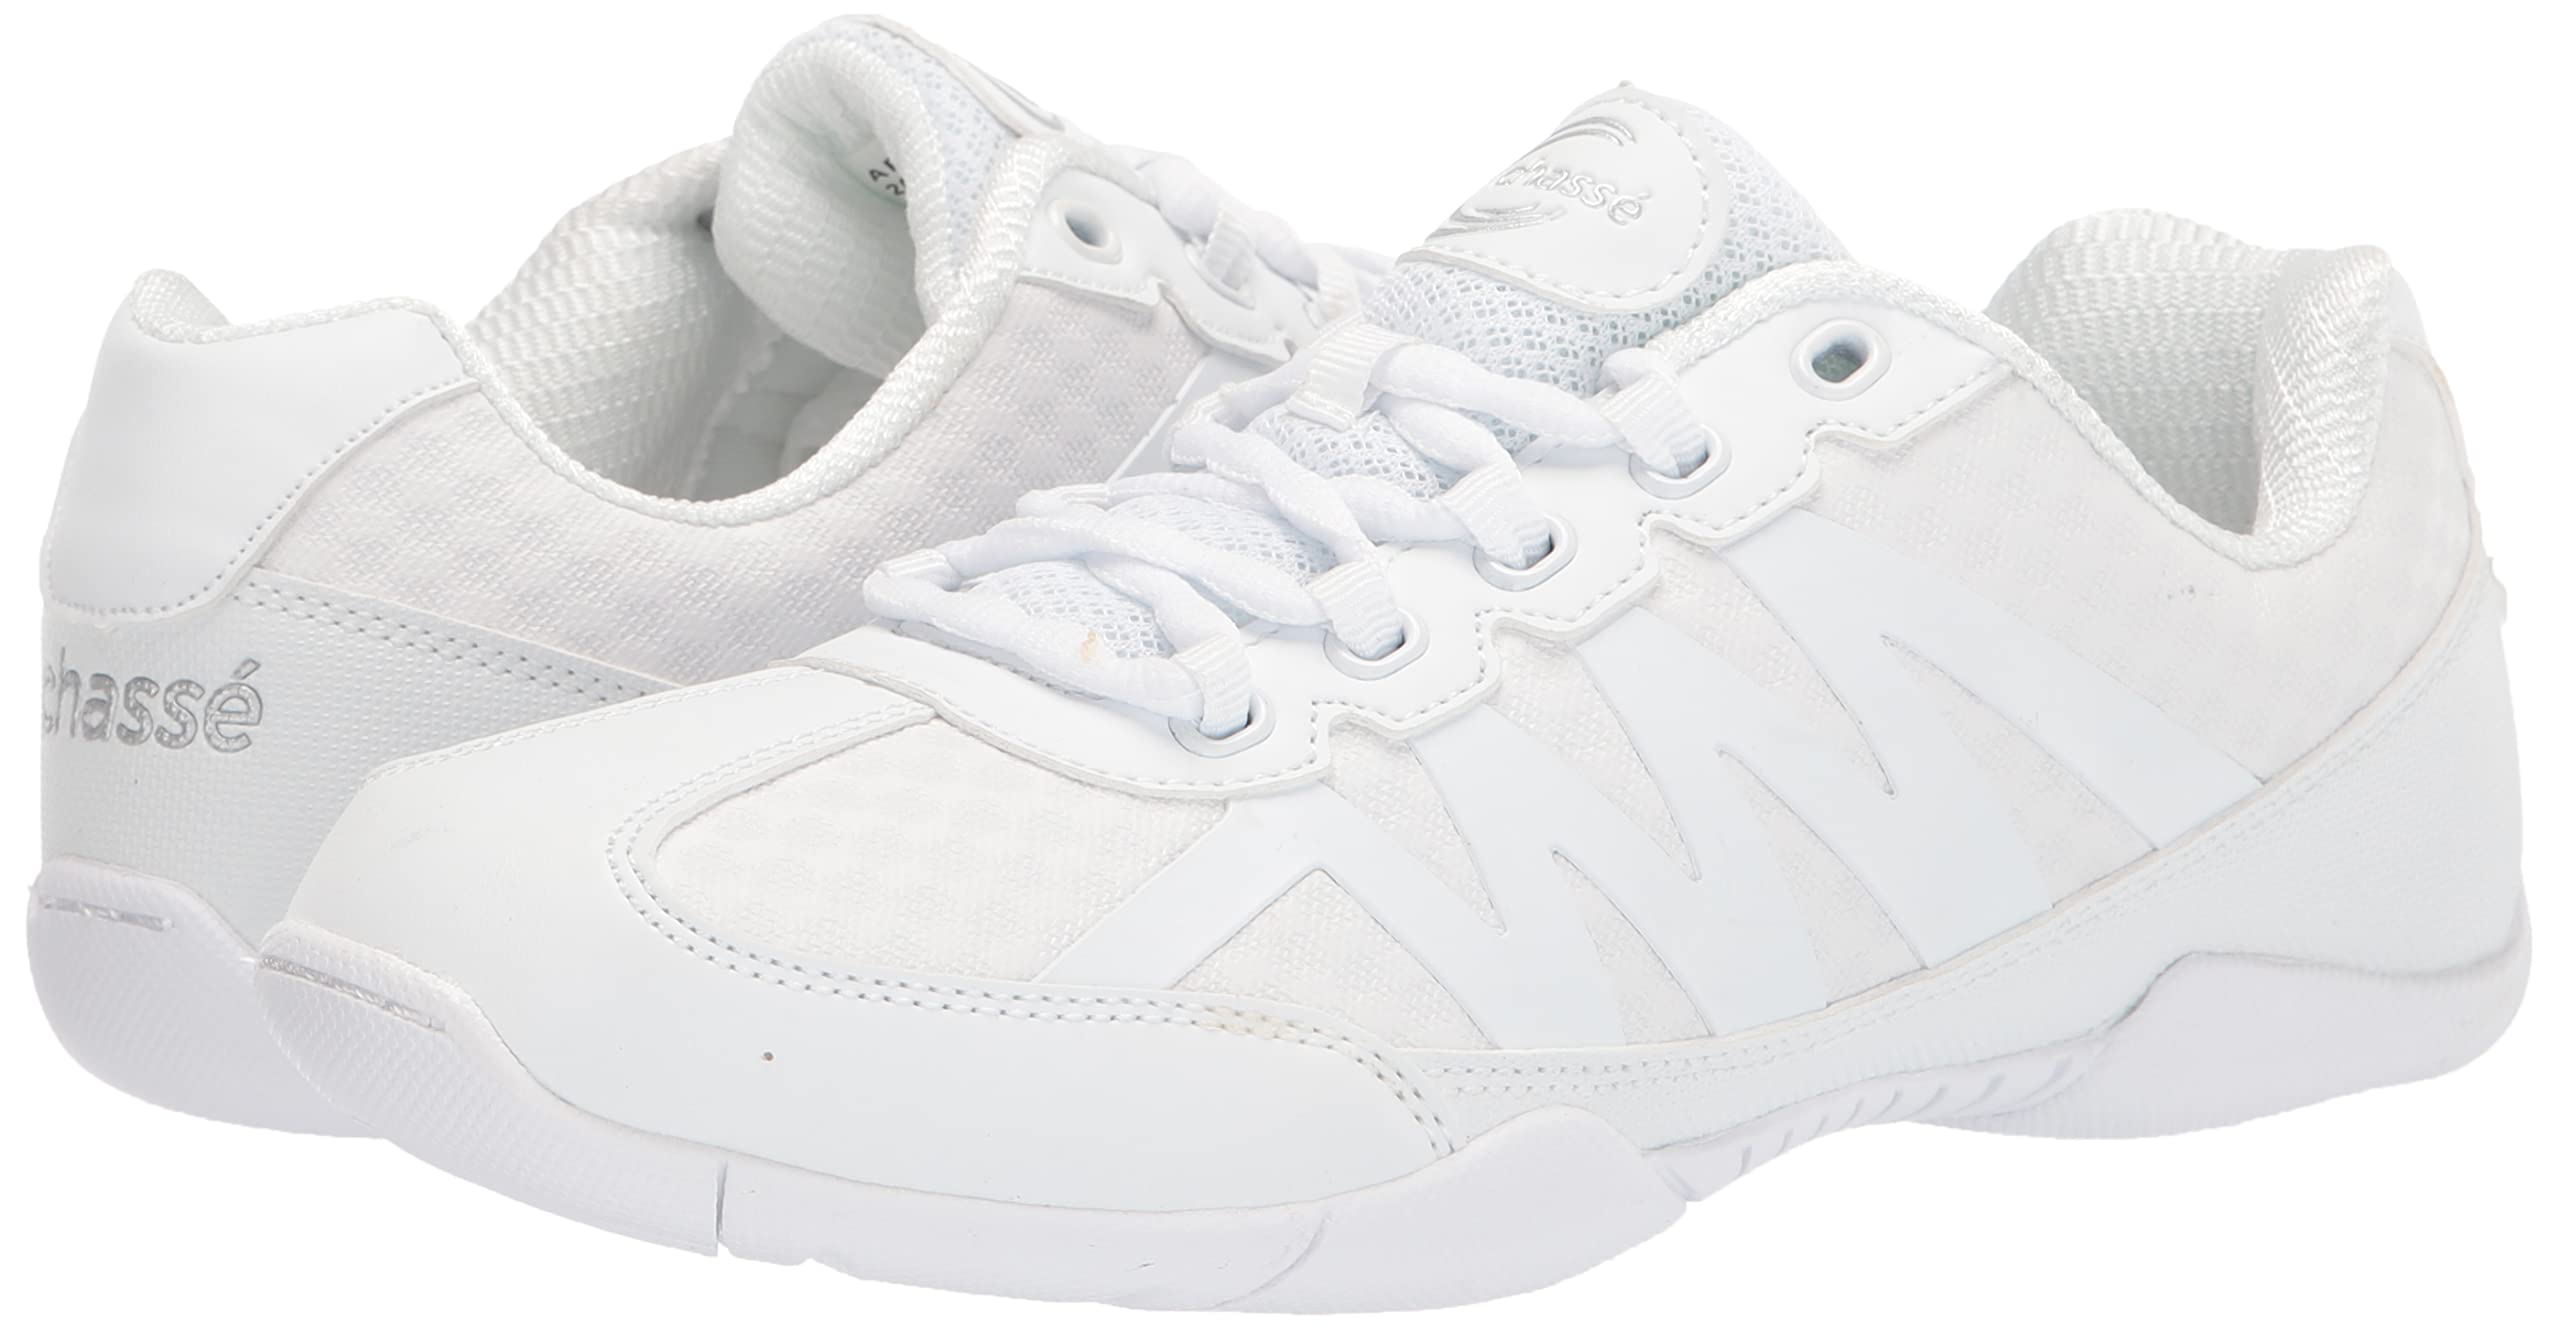 GK Kids' Chase Apex Cheer Shoes | Dick's Sporting Goods